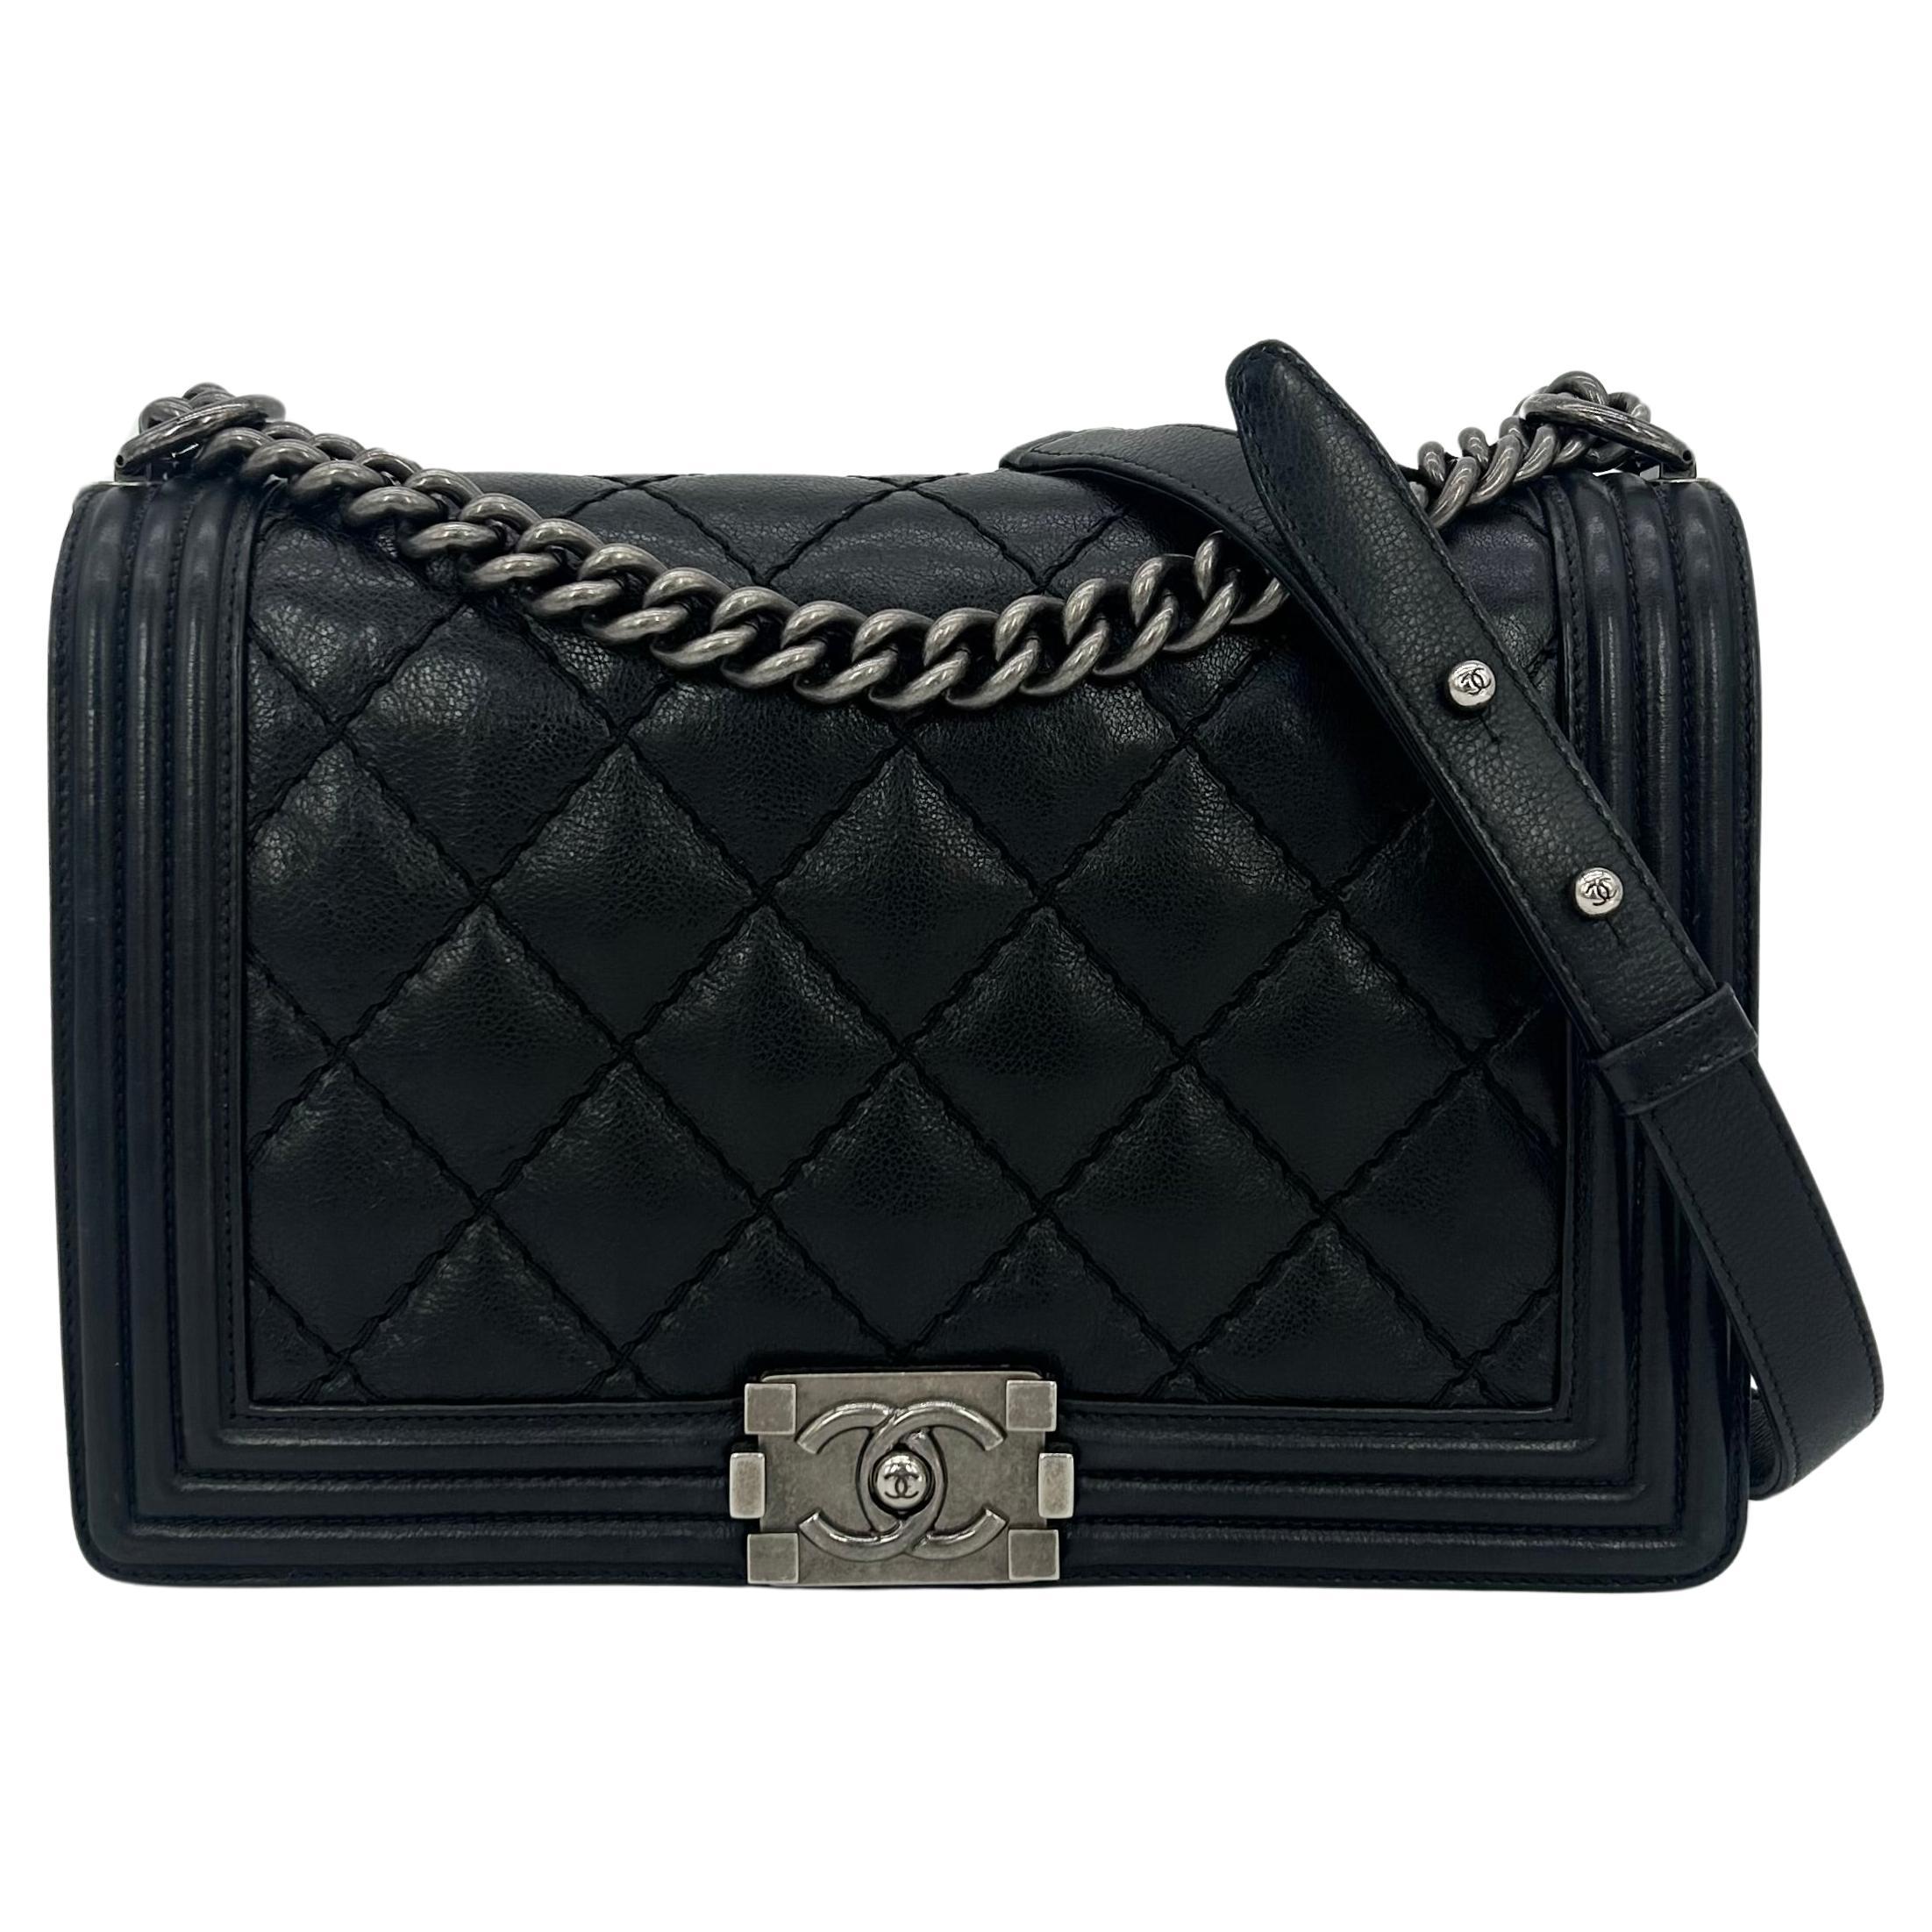 Chanel Black Lambskin Quilted Medium Boy Bag For Sale